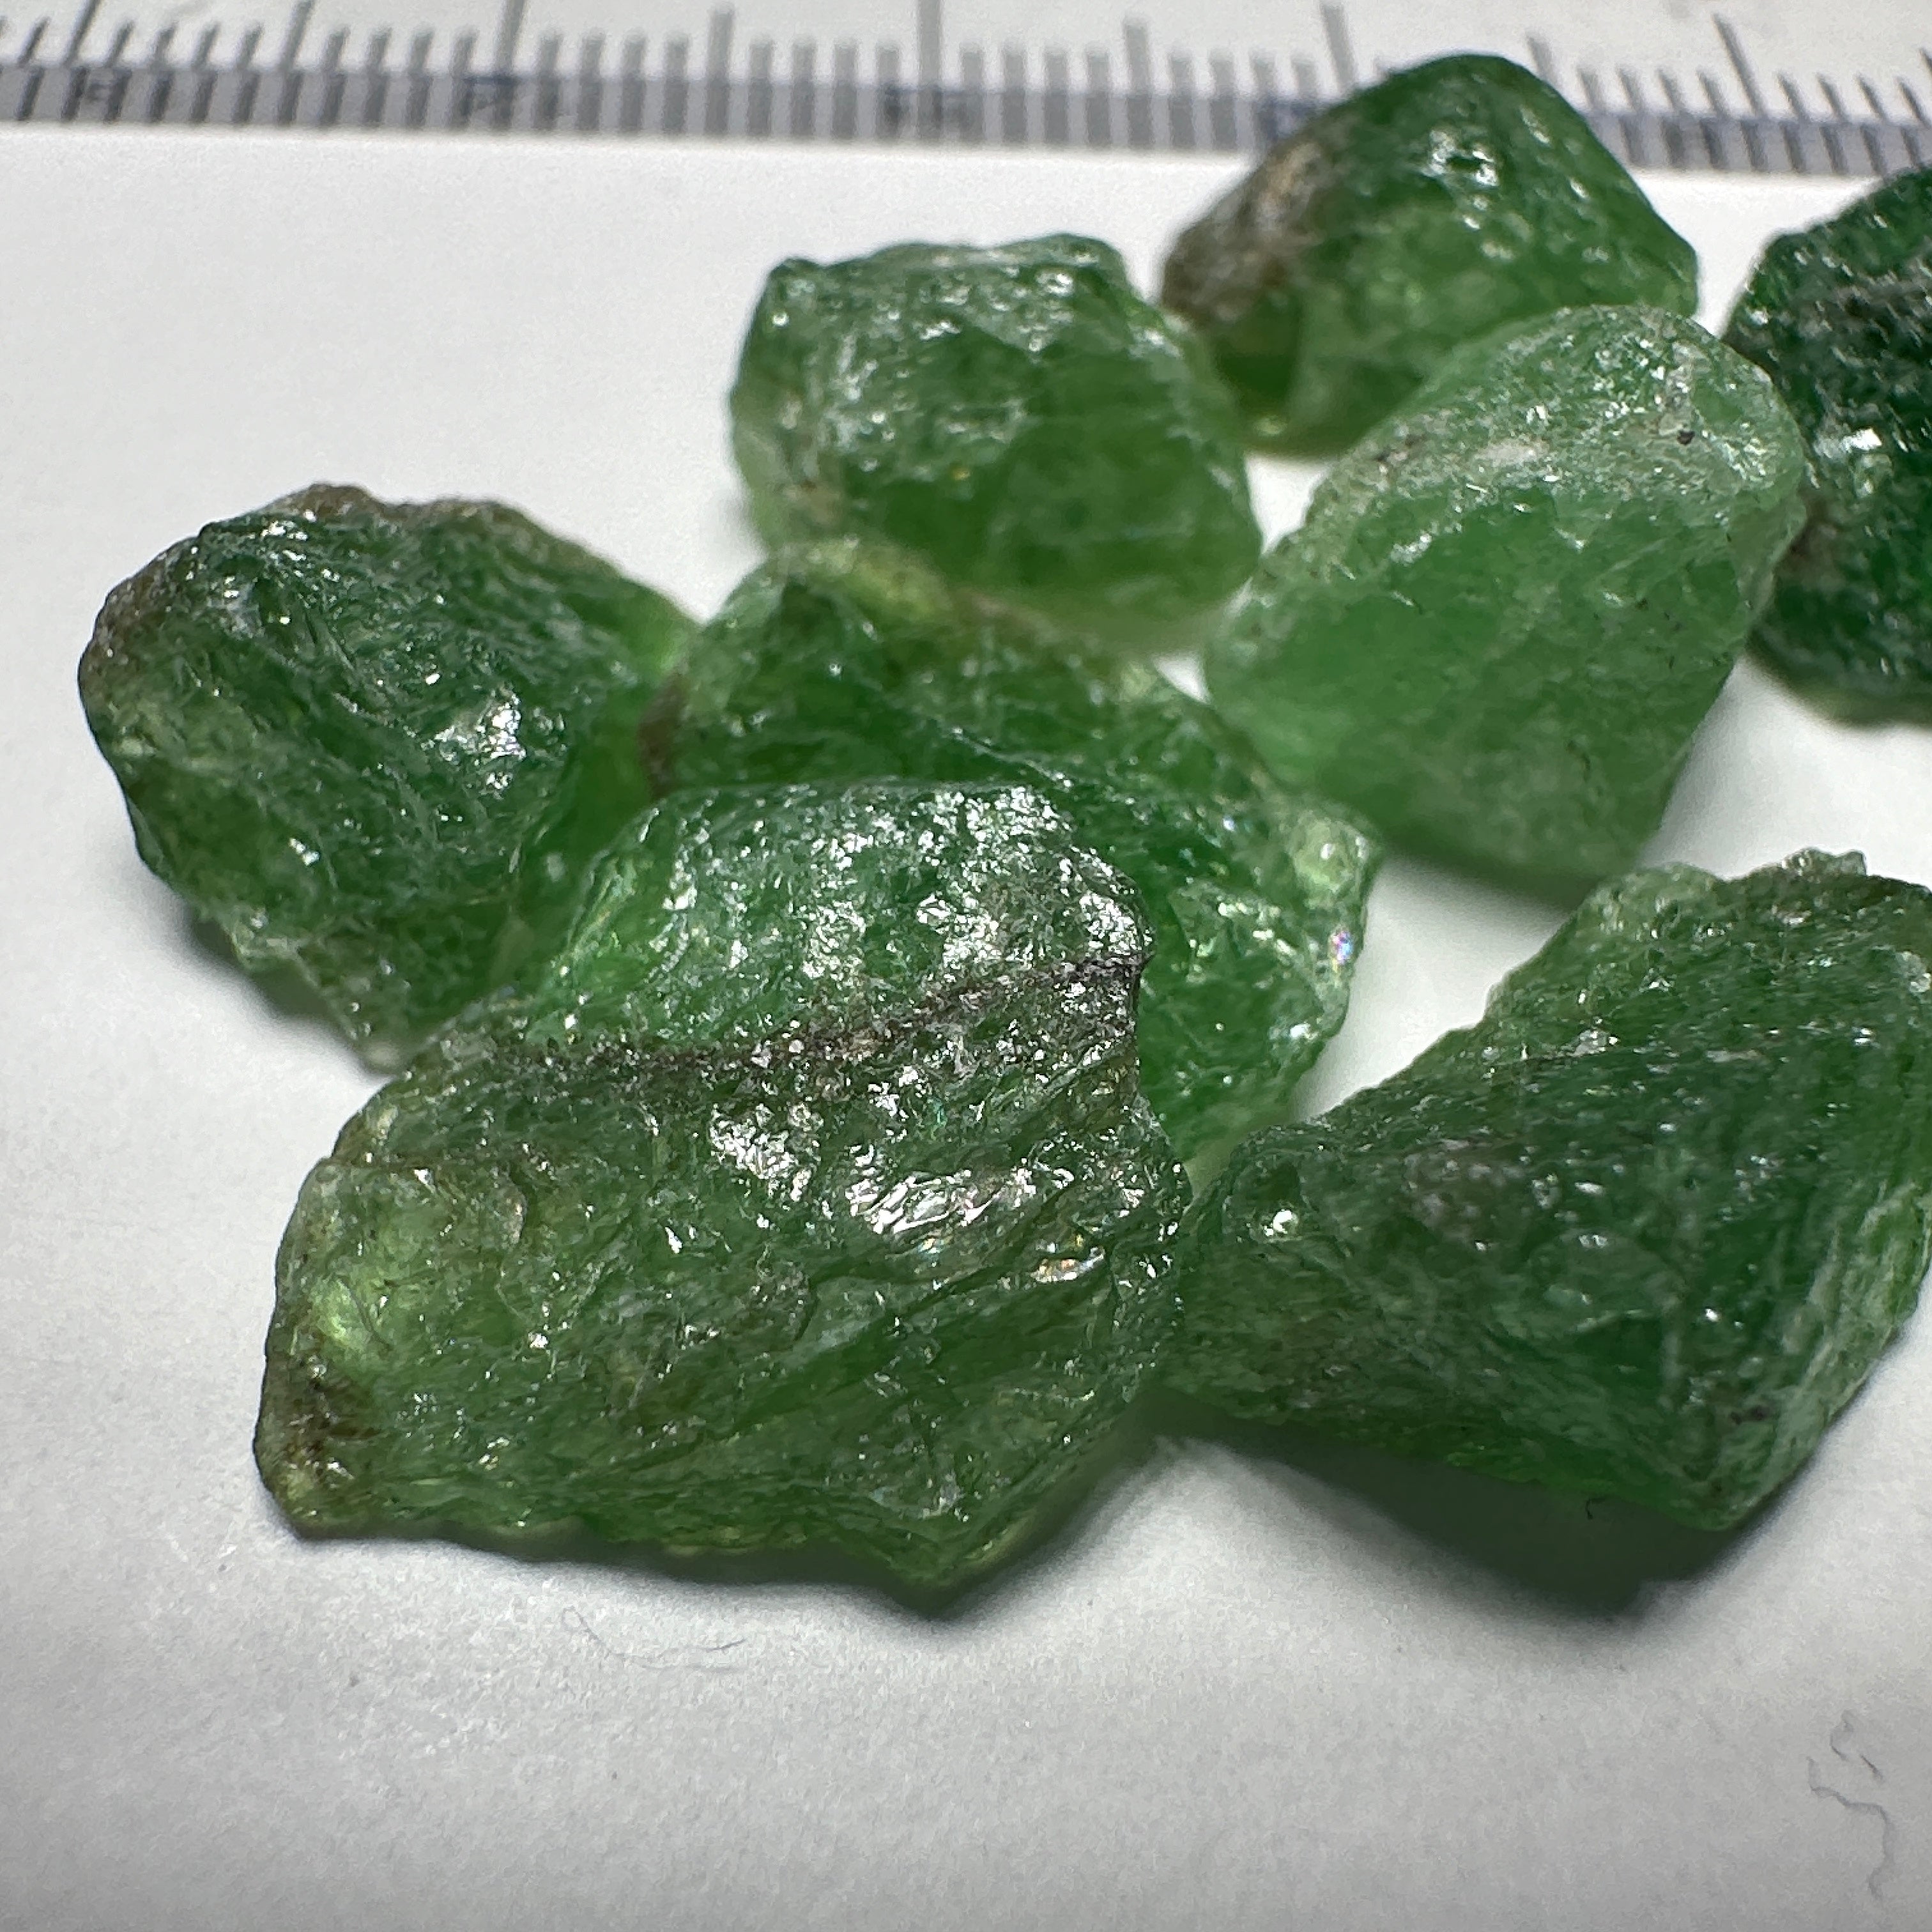 54.46ct Tsavorite Garnet Lot, Tanzania. Untreated Unheated. 3.98ct - 7.76ct. All included slightly transparent, good for setting in jewellery as is or as specimens to add to a collection